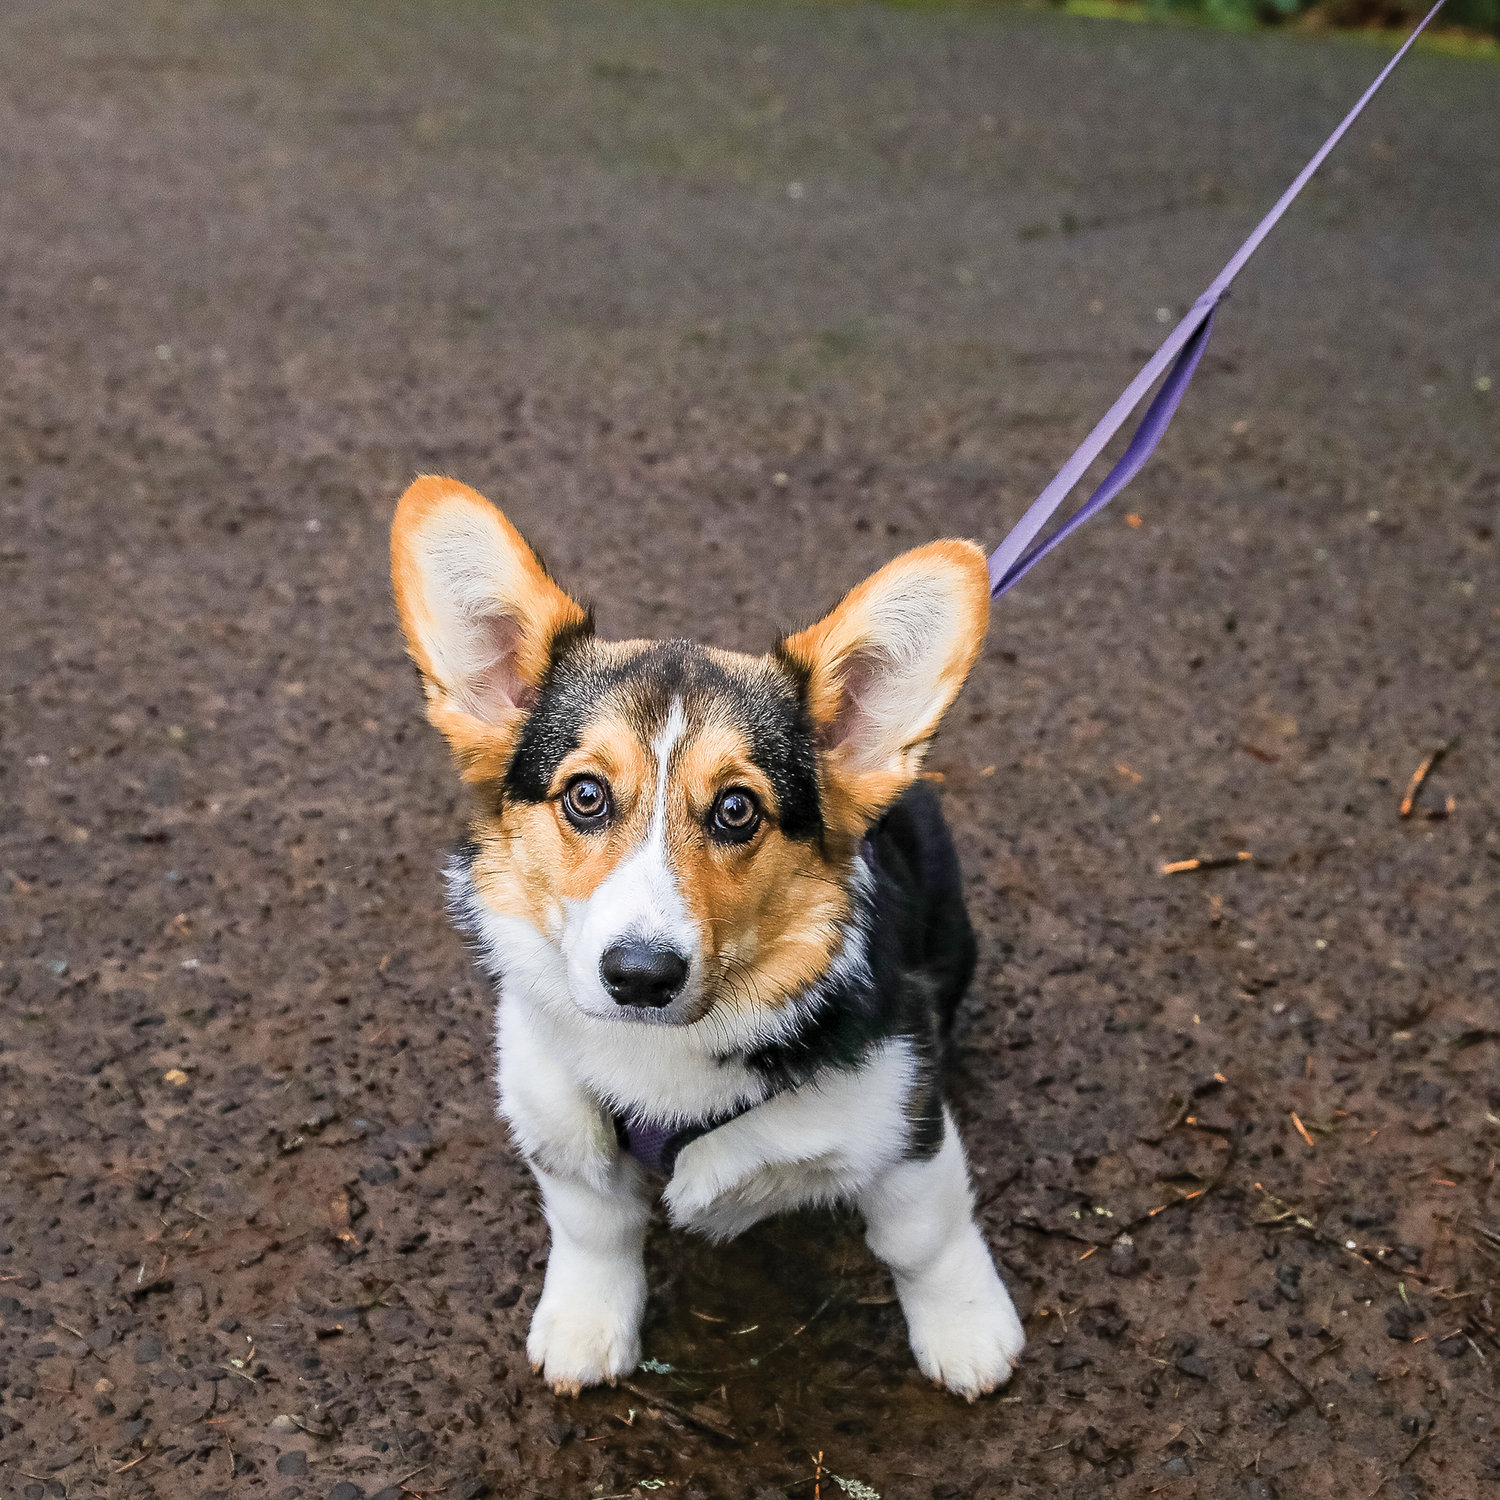 Luna, a young Corgi, and her owner prepare to walk on the Hantwick Trail on Thursday, Jan. 19.